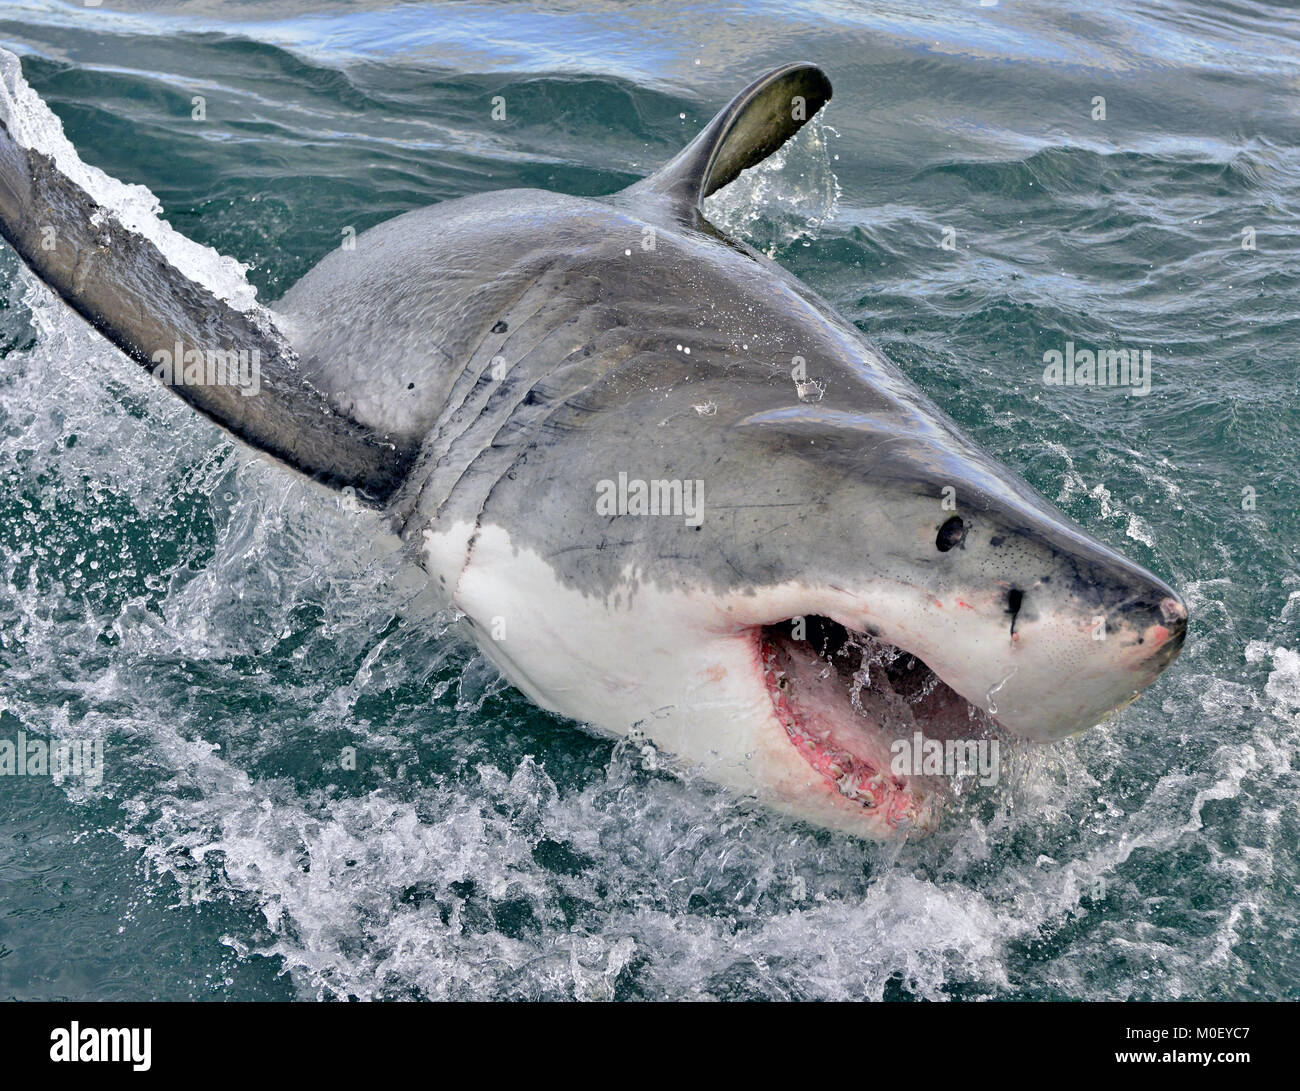 Great white shark, Carcharodon carcharias, with open mouth. False Bay, South Africa, Atlantic Ocean Stock Photo